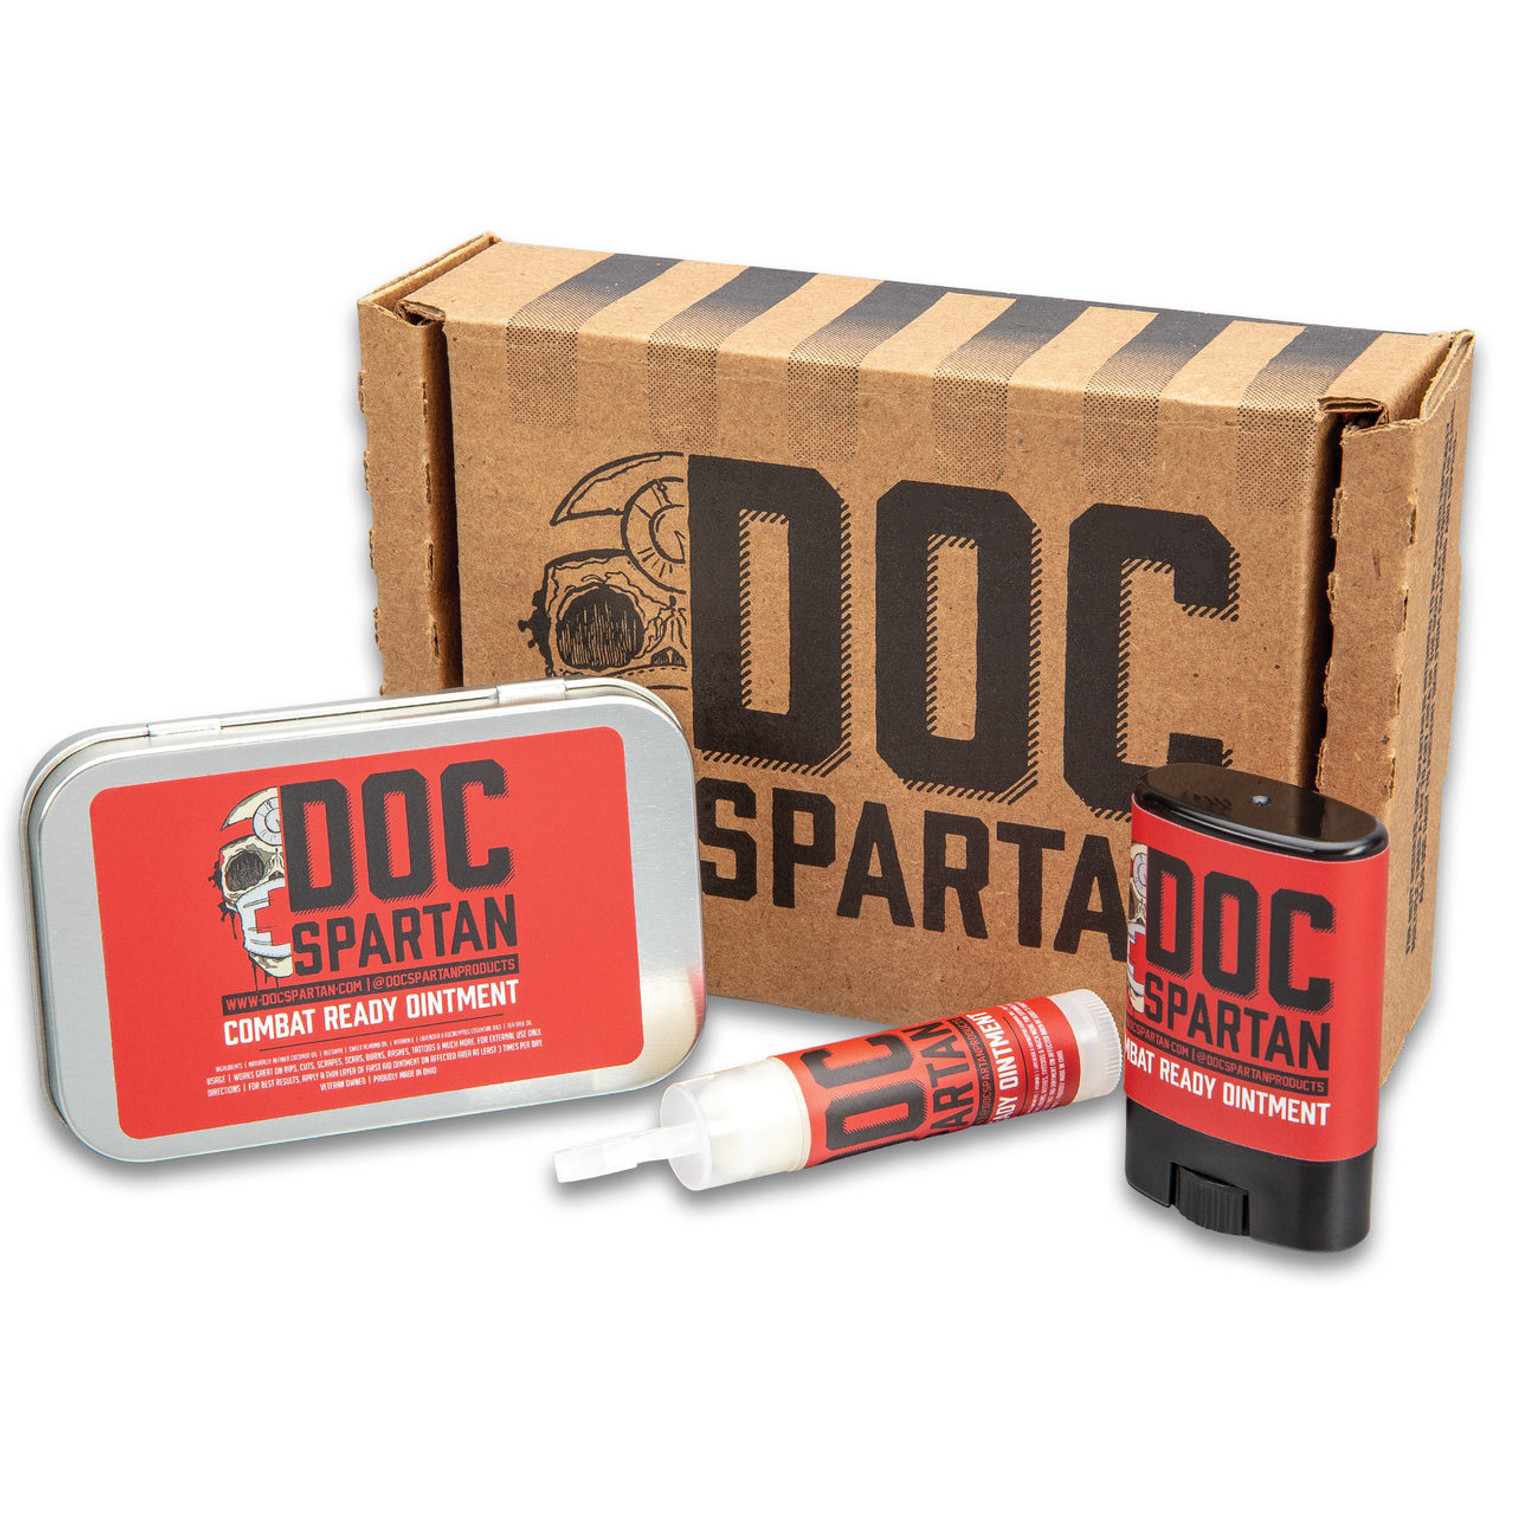 Doc Spartan Combat Ready Ointment